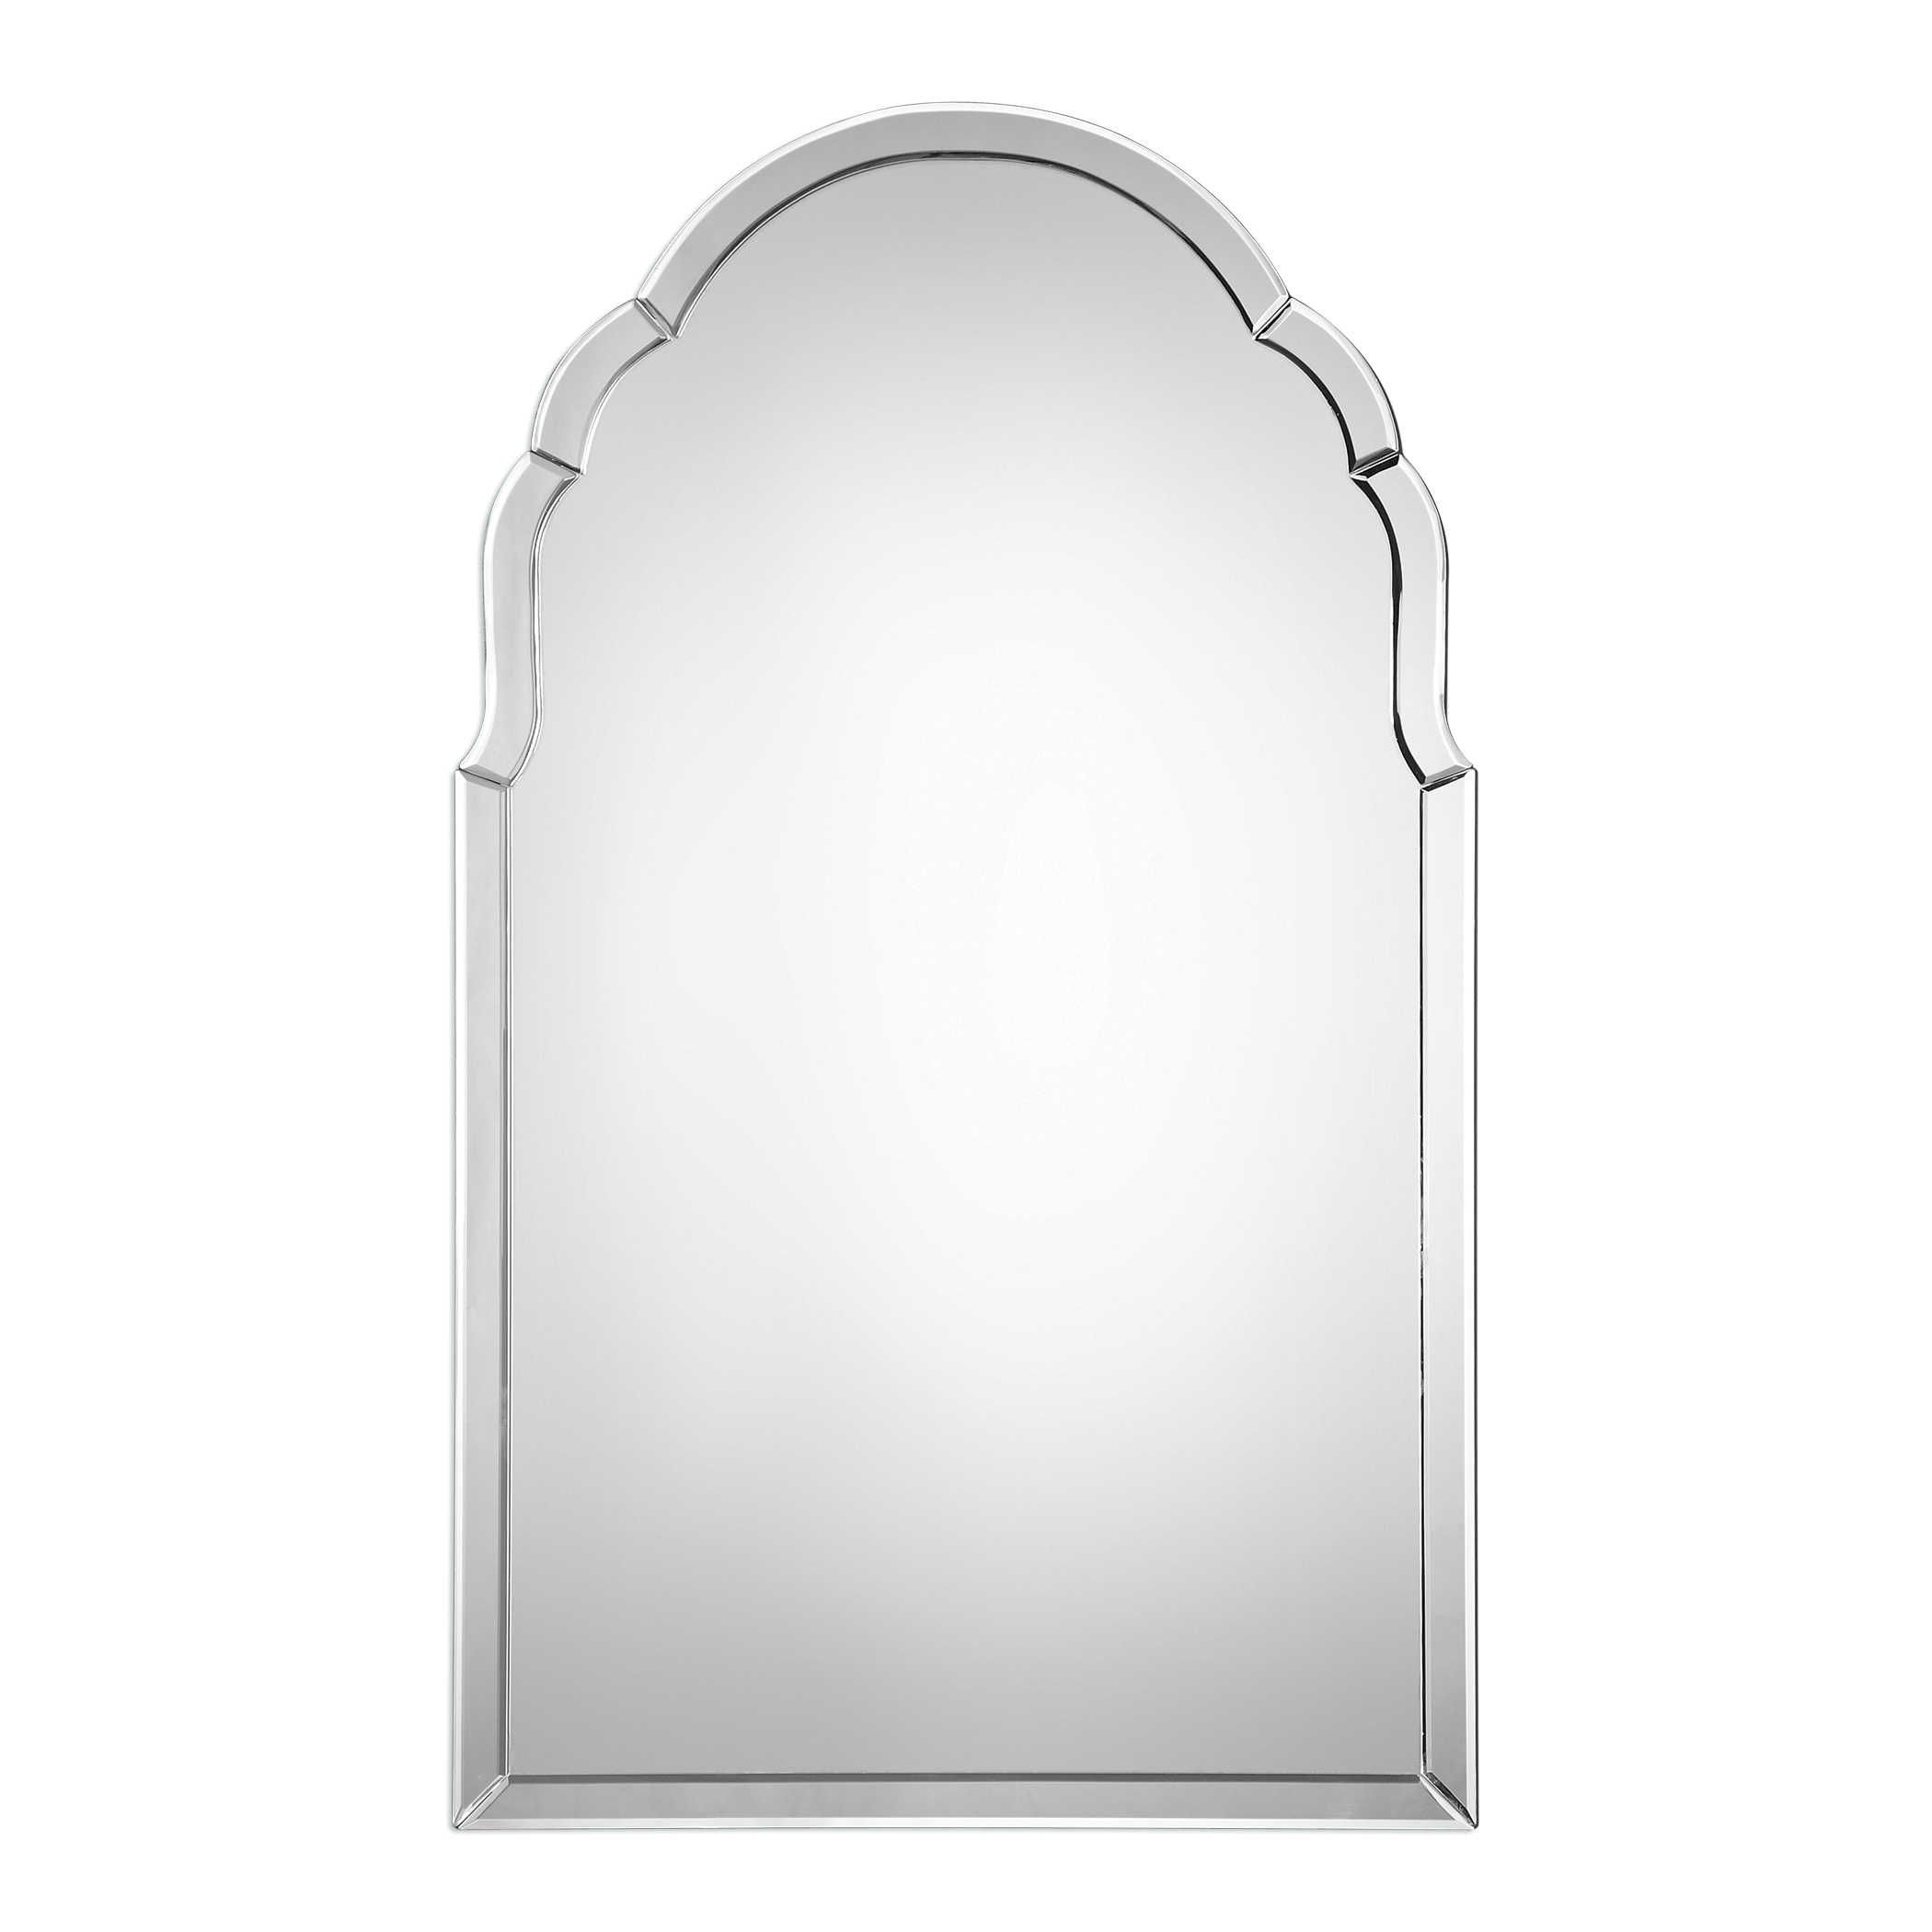 Frameless Venetian Arch Wall Mirror Curved Beveled Glass 792977091494 Intended For Frameless Beveled Wall Mirrors (View 7 of 15)